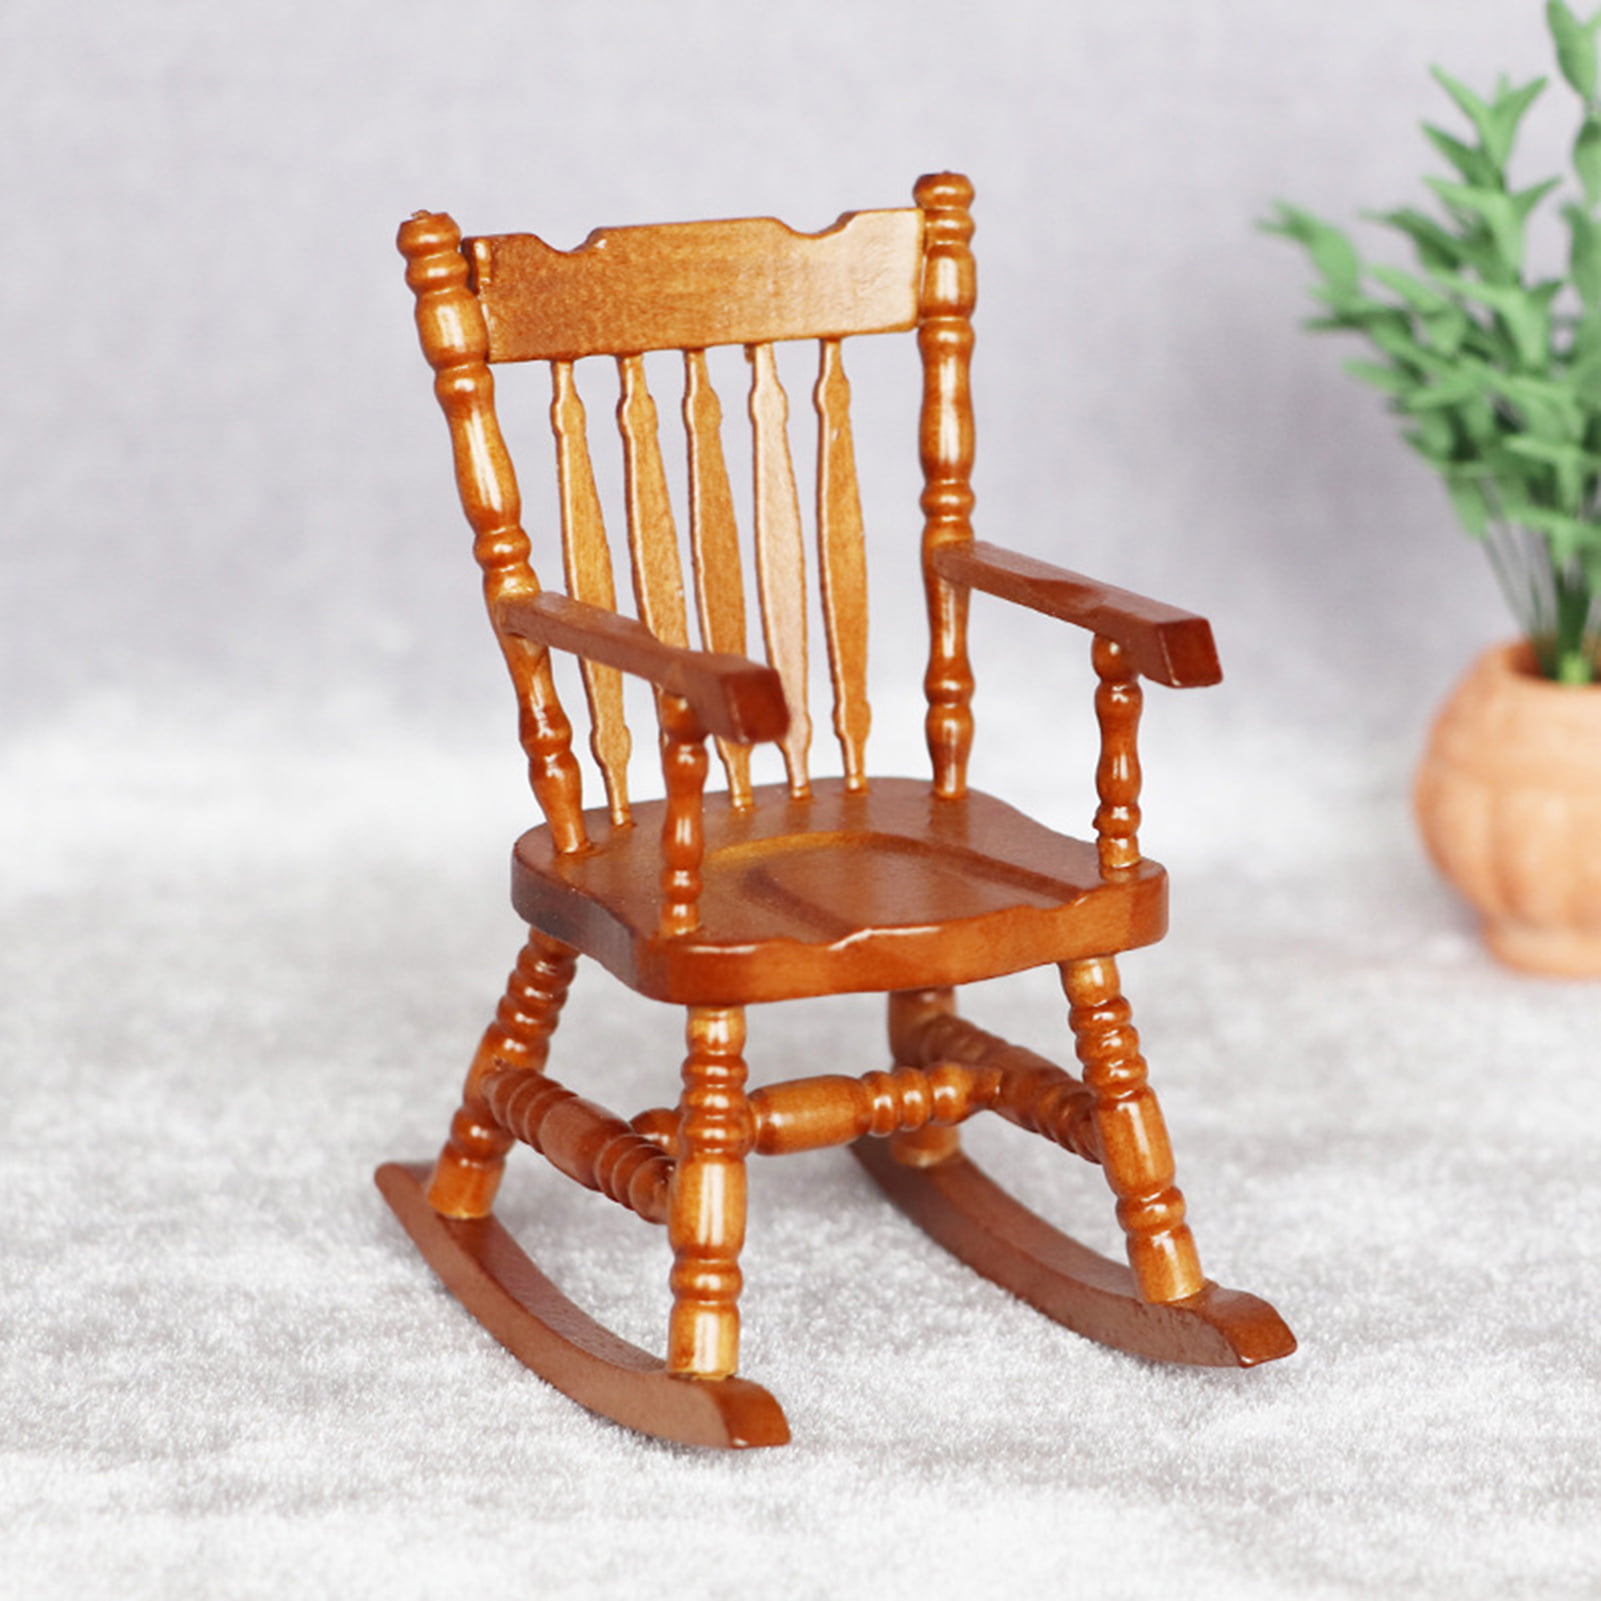 7haofang 5Pcs/Set Dining Table Chair Dollhouse Miniature Decorative Wooden Furniture